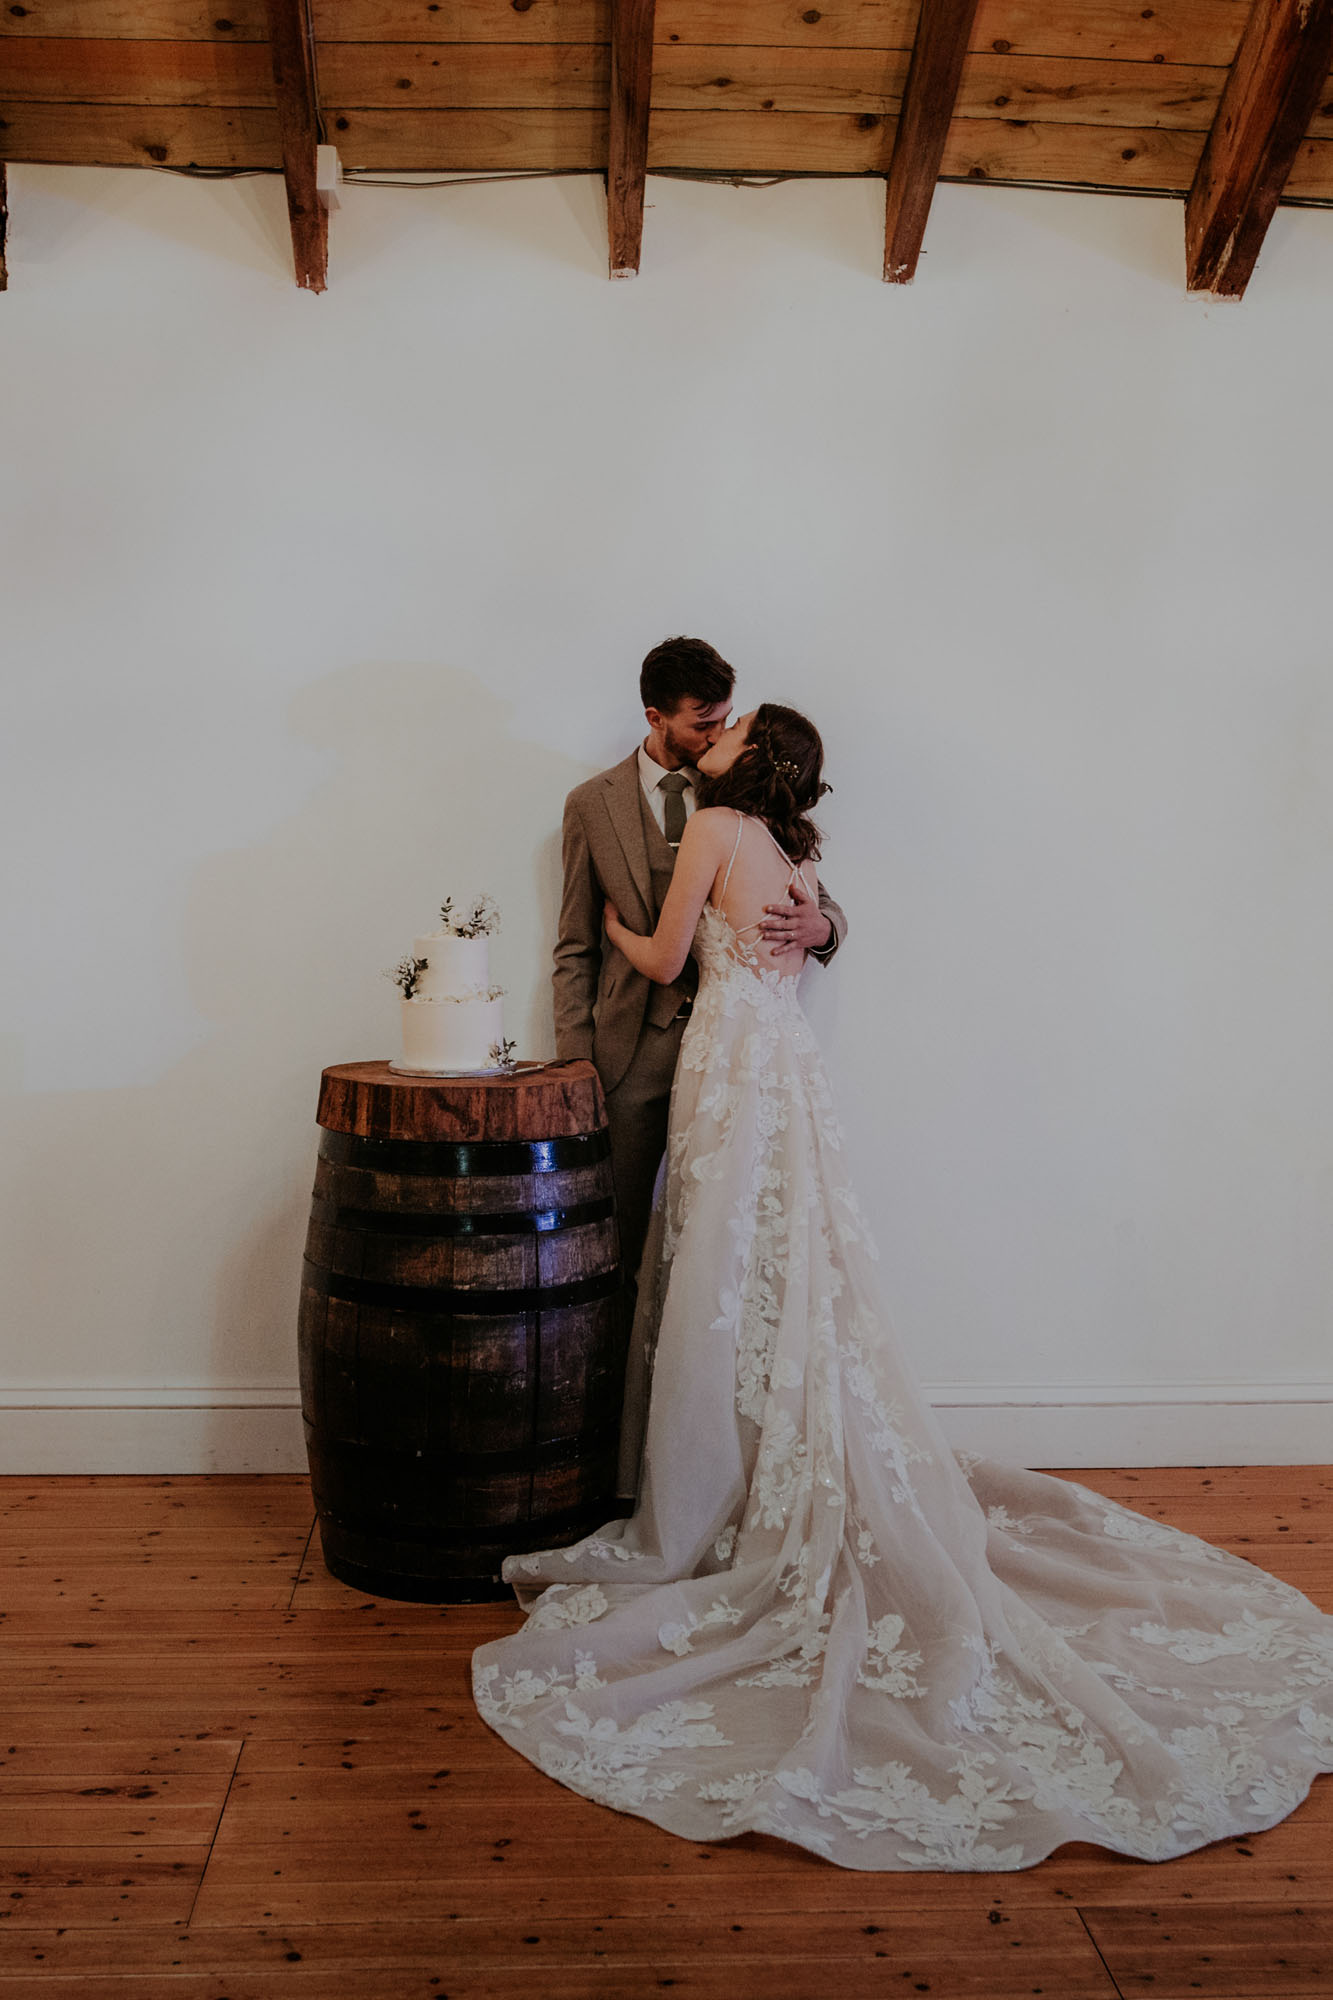 Bride in long lace dress cutting wedding cake on top of a wooden barrel 